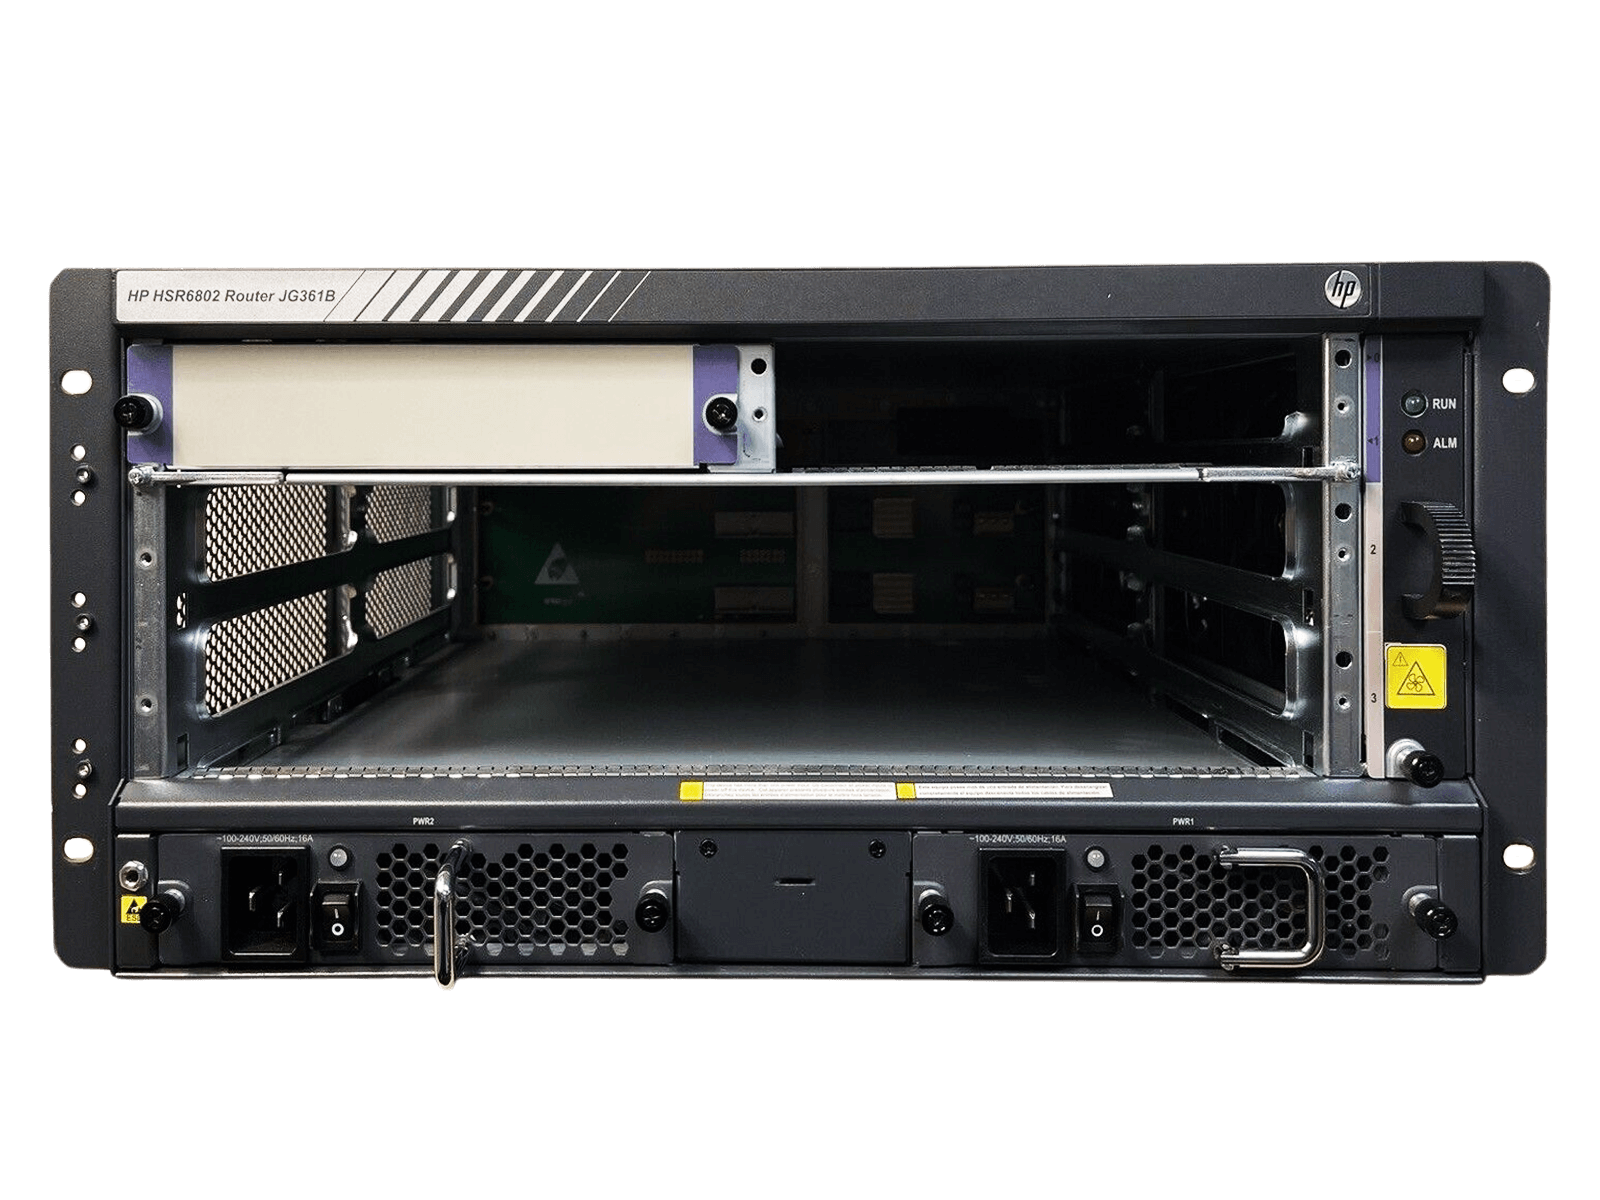 HPE JG362A  FlexNetwork HSR6802 Router Chassis with 2x AC 1200W PSU JG335A.